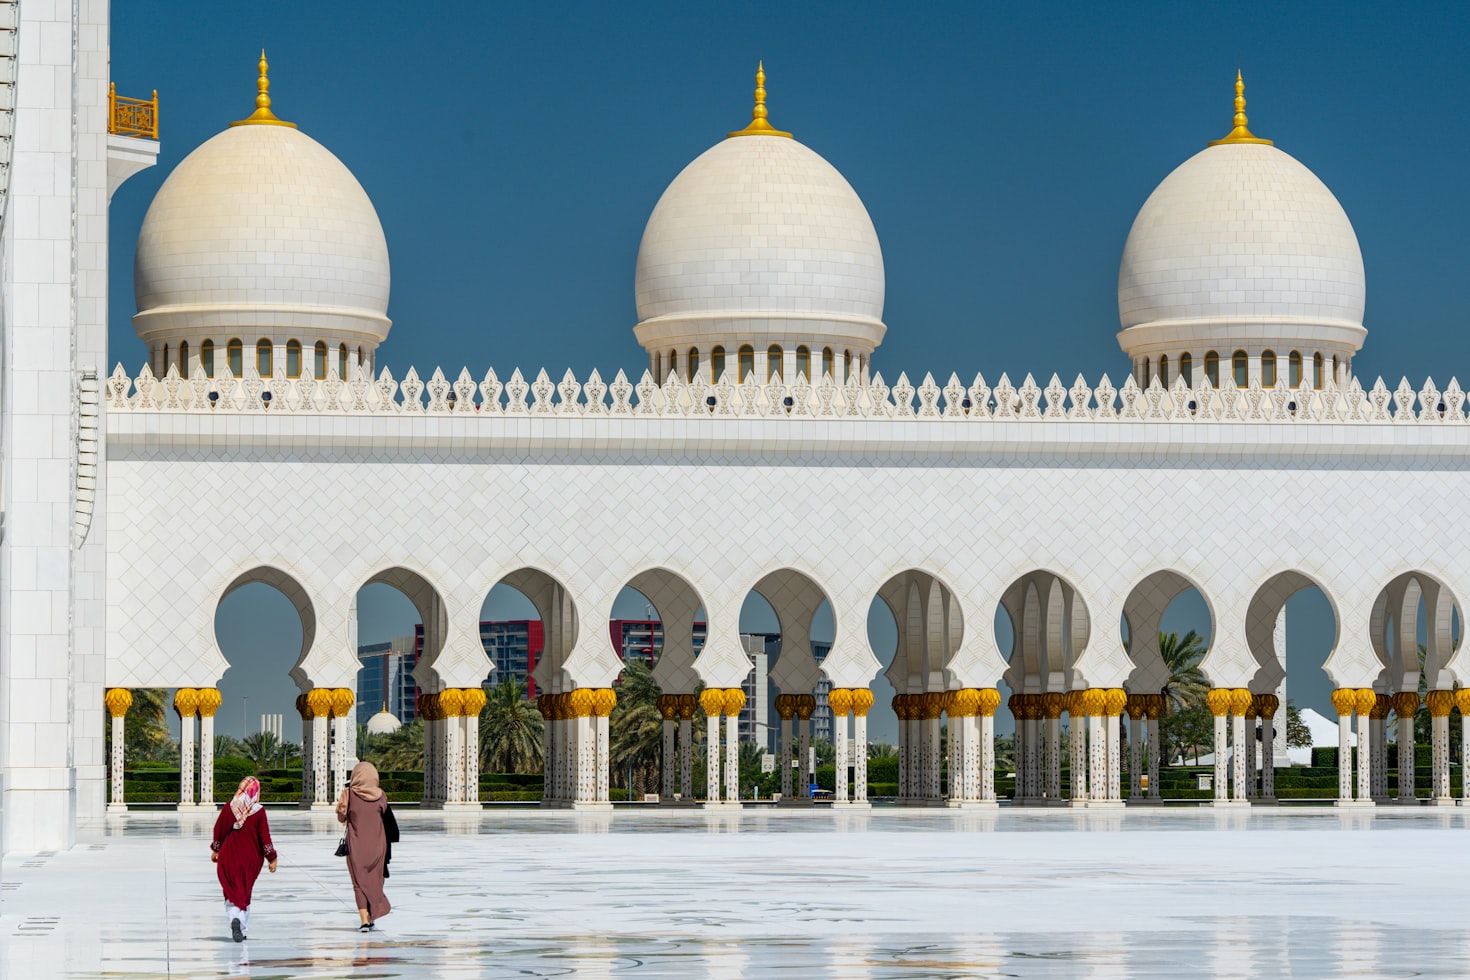 People walking across courtyard of one of the largest mosque in Sheik Zayed Grand Mosque, Abu Dhabi, UAE